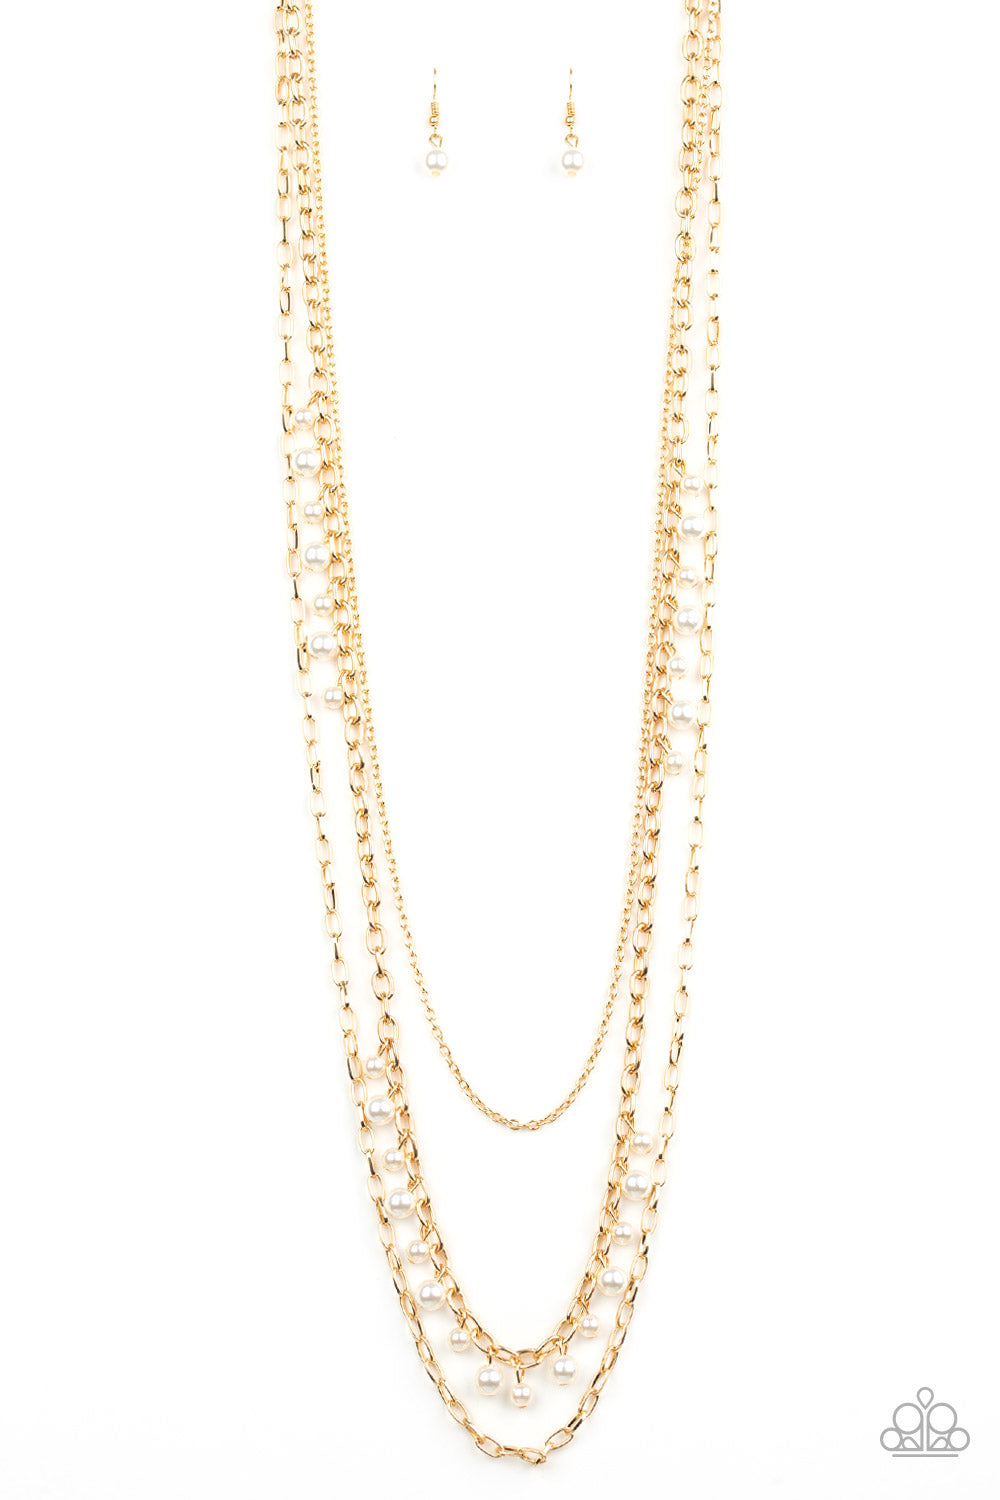 PEARL PAGEANT - GOLD MULTI LAYER PEARLS NECKLACE